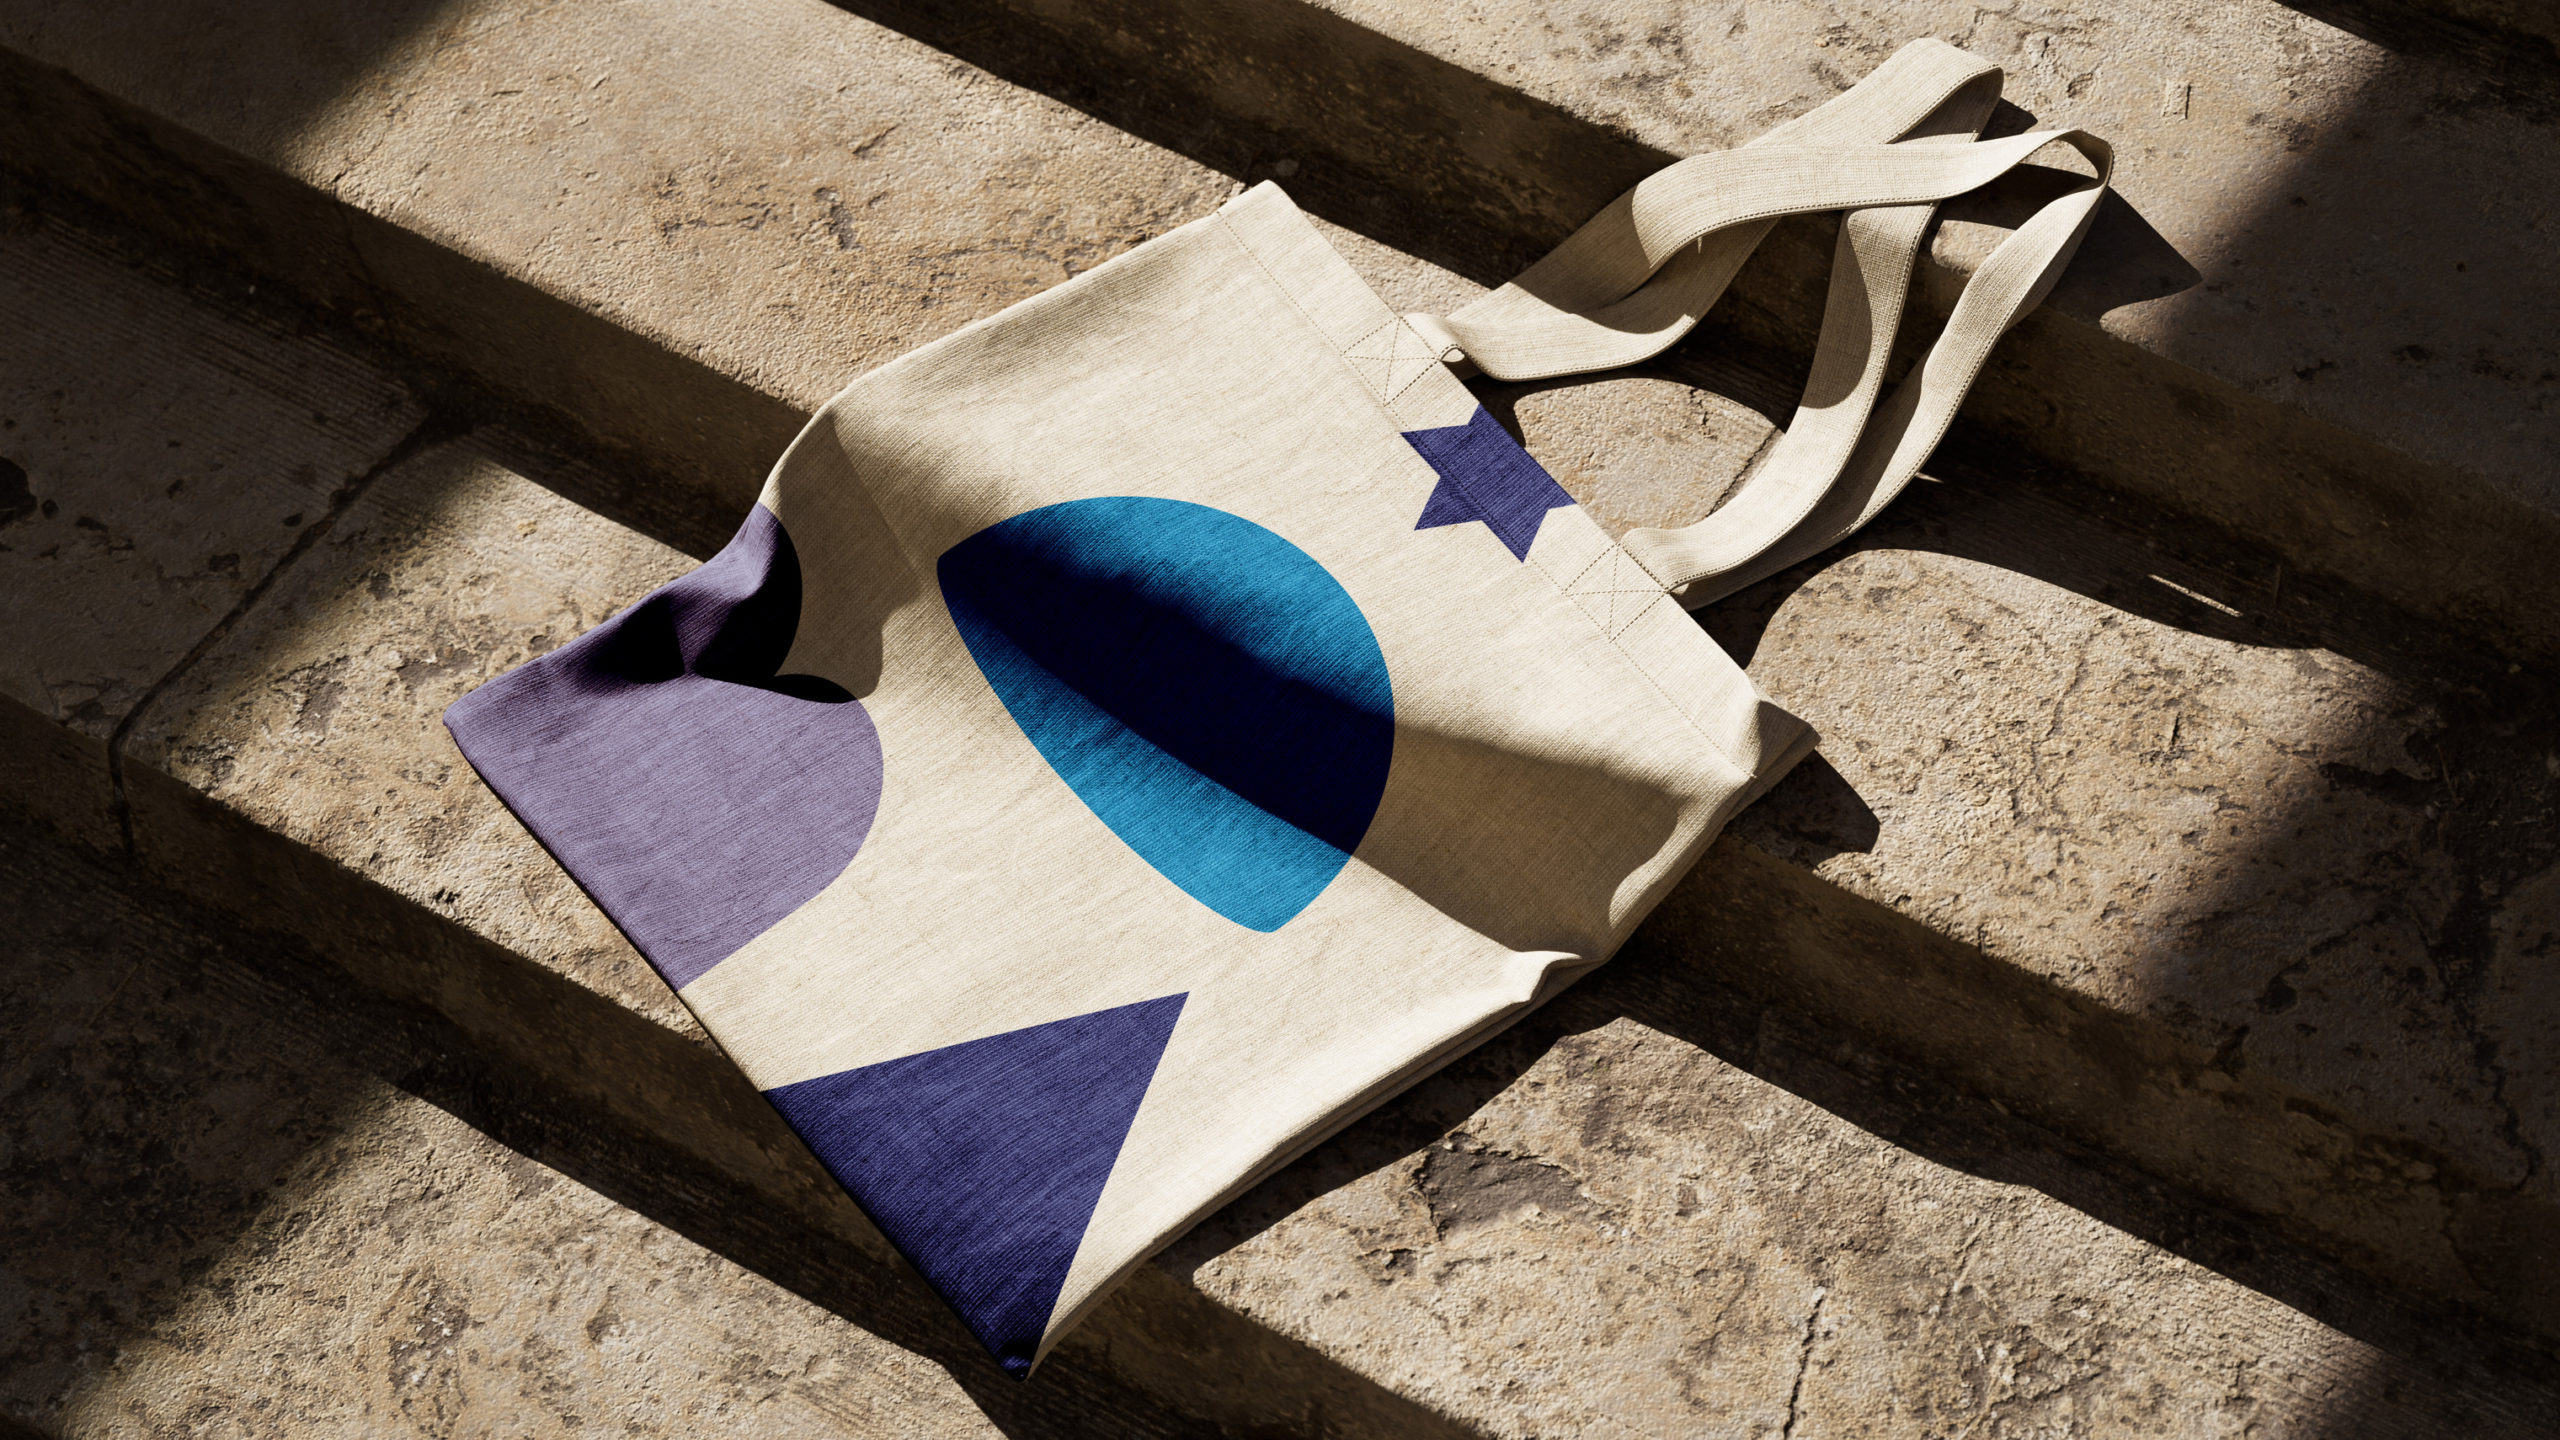 A view of a jute bag for the Society for Christian-Jewish Cooperation, designed by Florida Brand Design